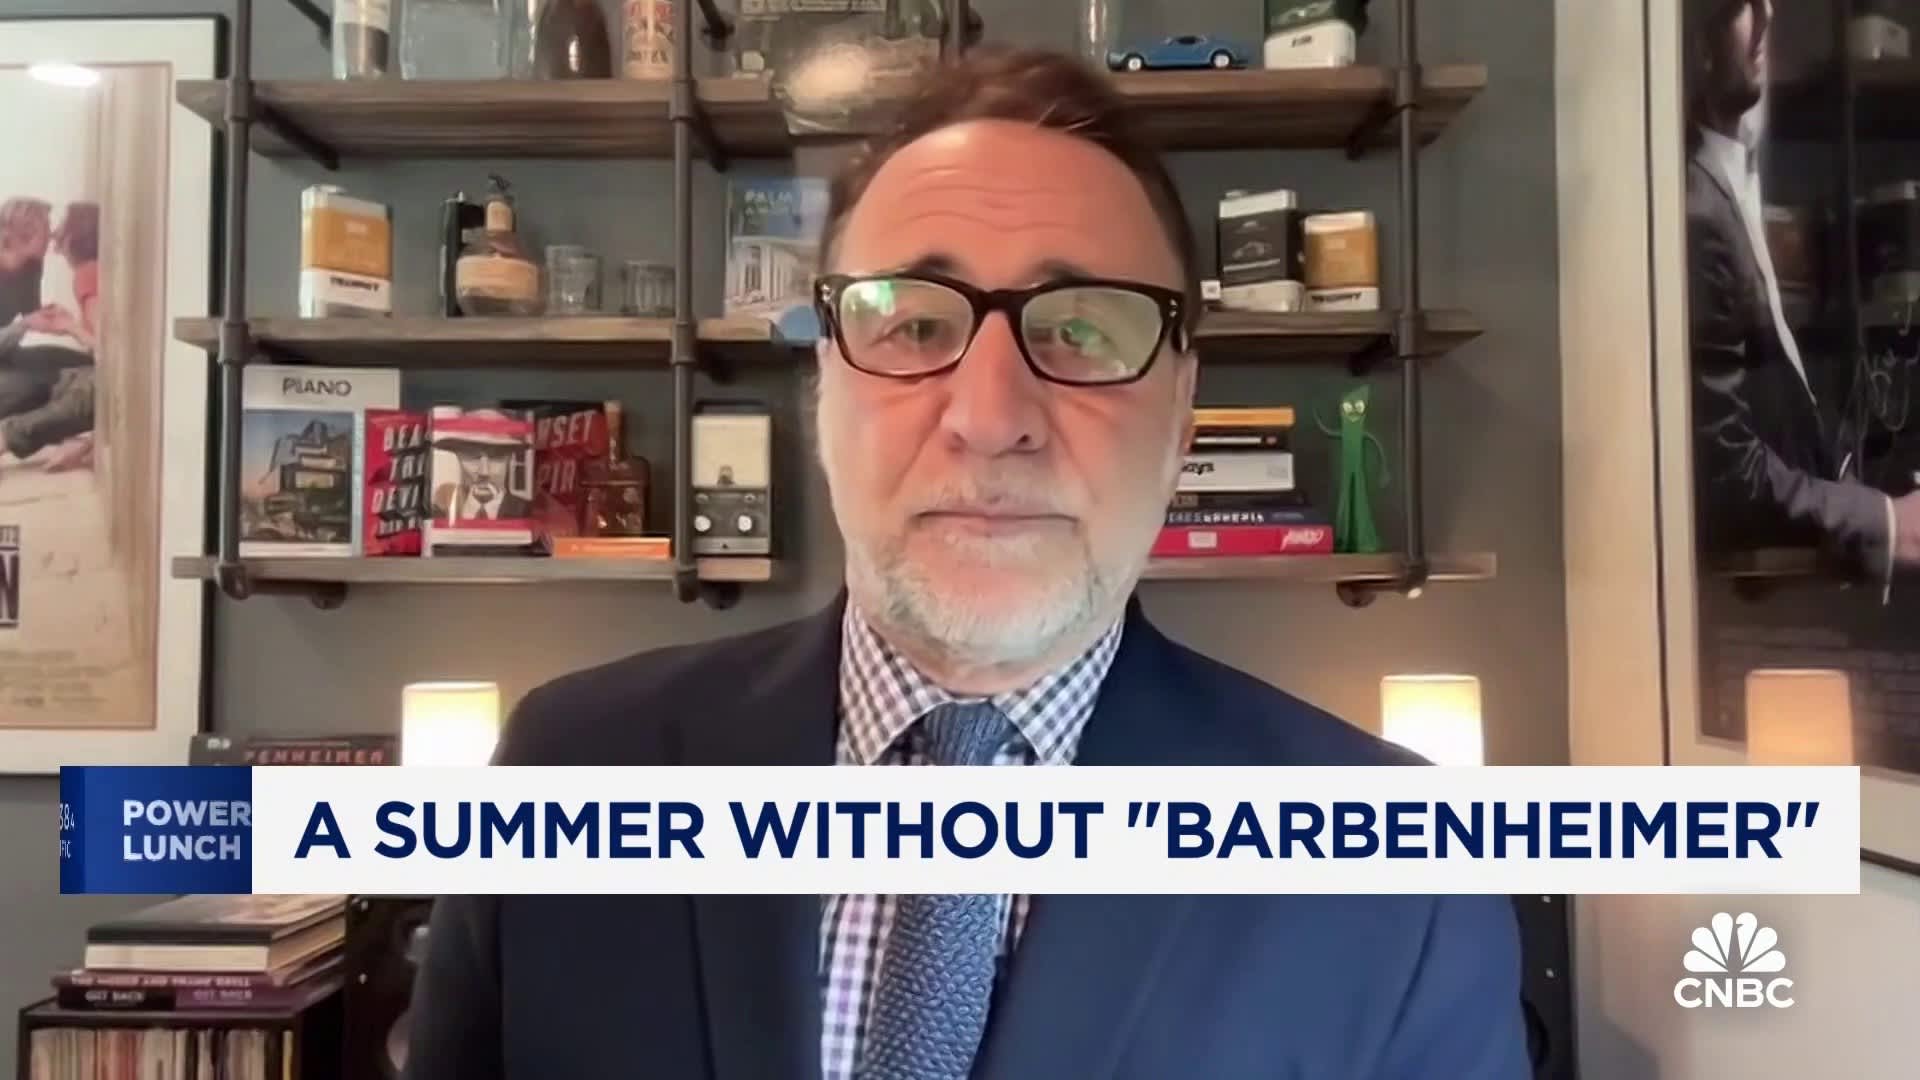 Comscore's Paul Dergarabedian breaks down his summer box office forecasts